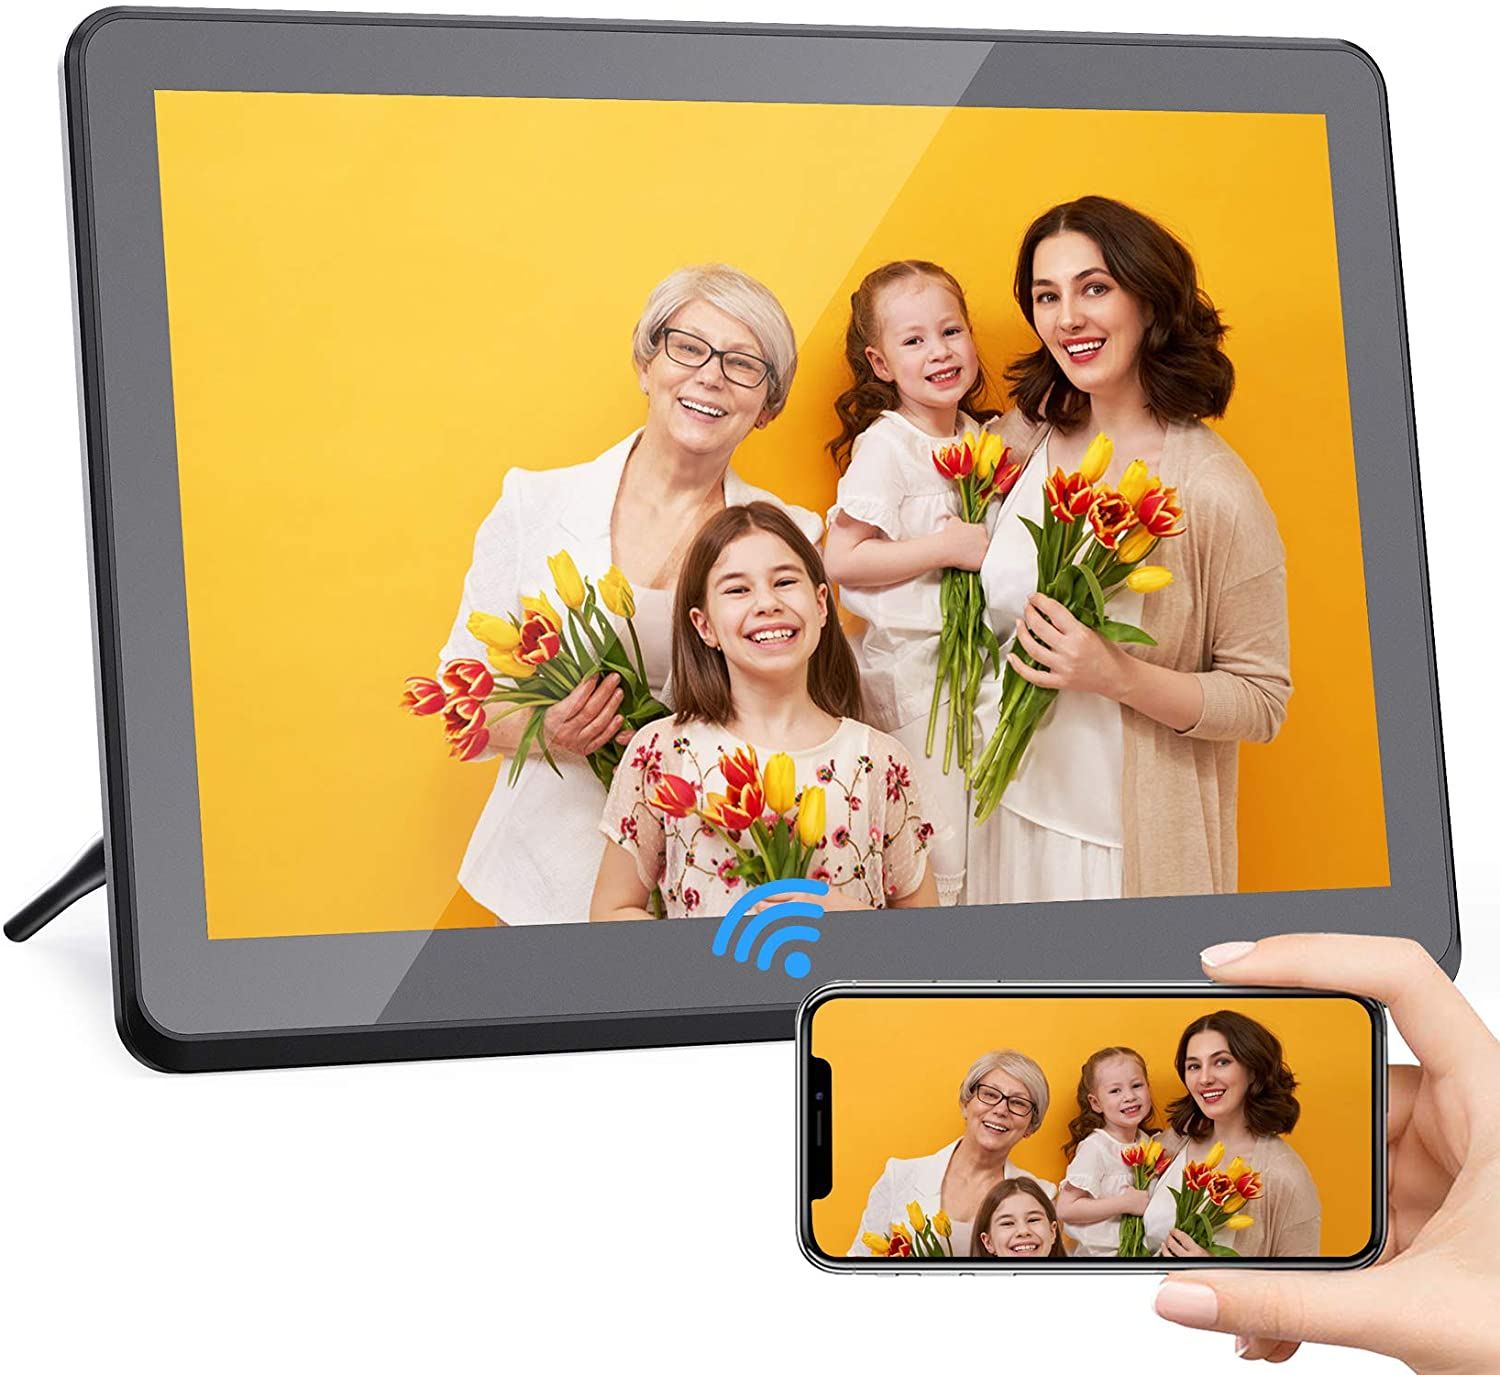 Digital Photo Frame 7 Inch Digital Picture Frame with HD IPS Display Photo/Music/Video Player Calendar Alarm Auto On/Off Timer Remote Control